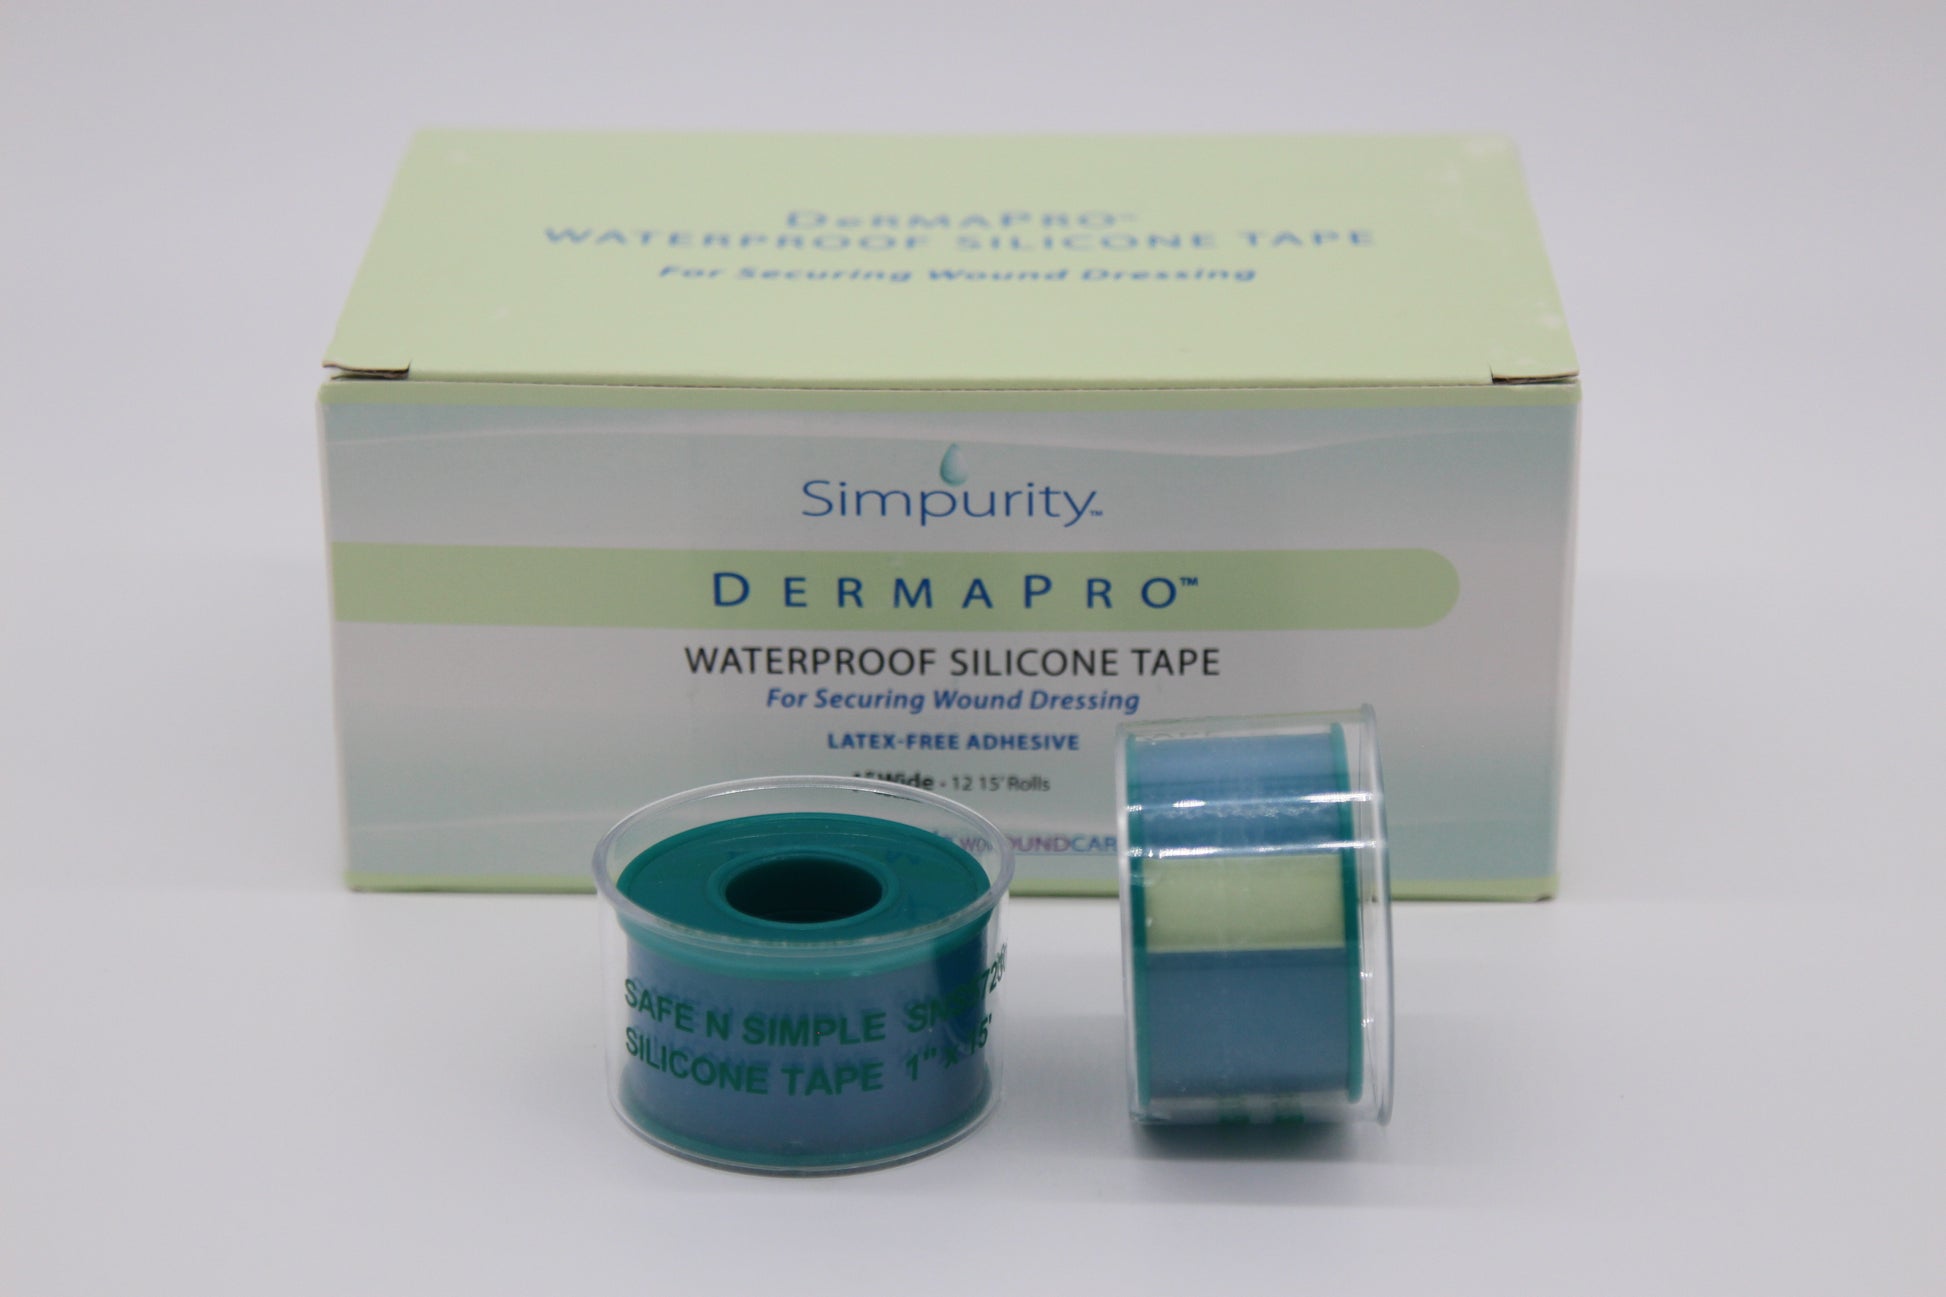 DermaPro Waterproof Silicone Tape | medical products | advanced wound care | Safe n Simple | SNS Medical